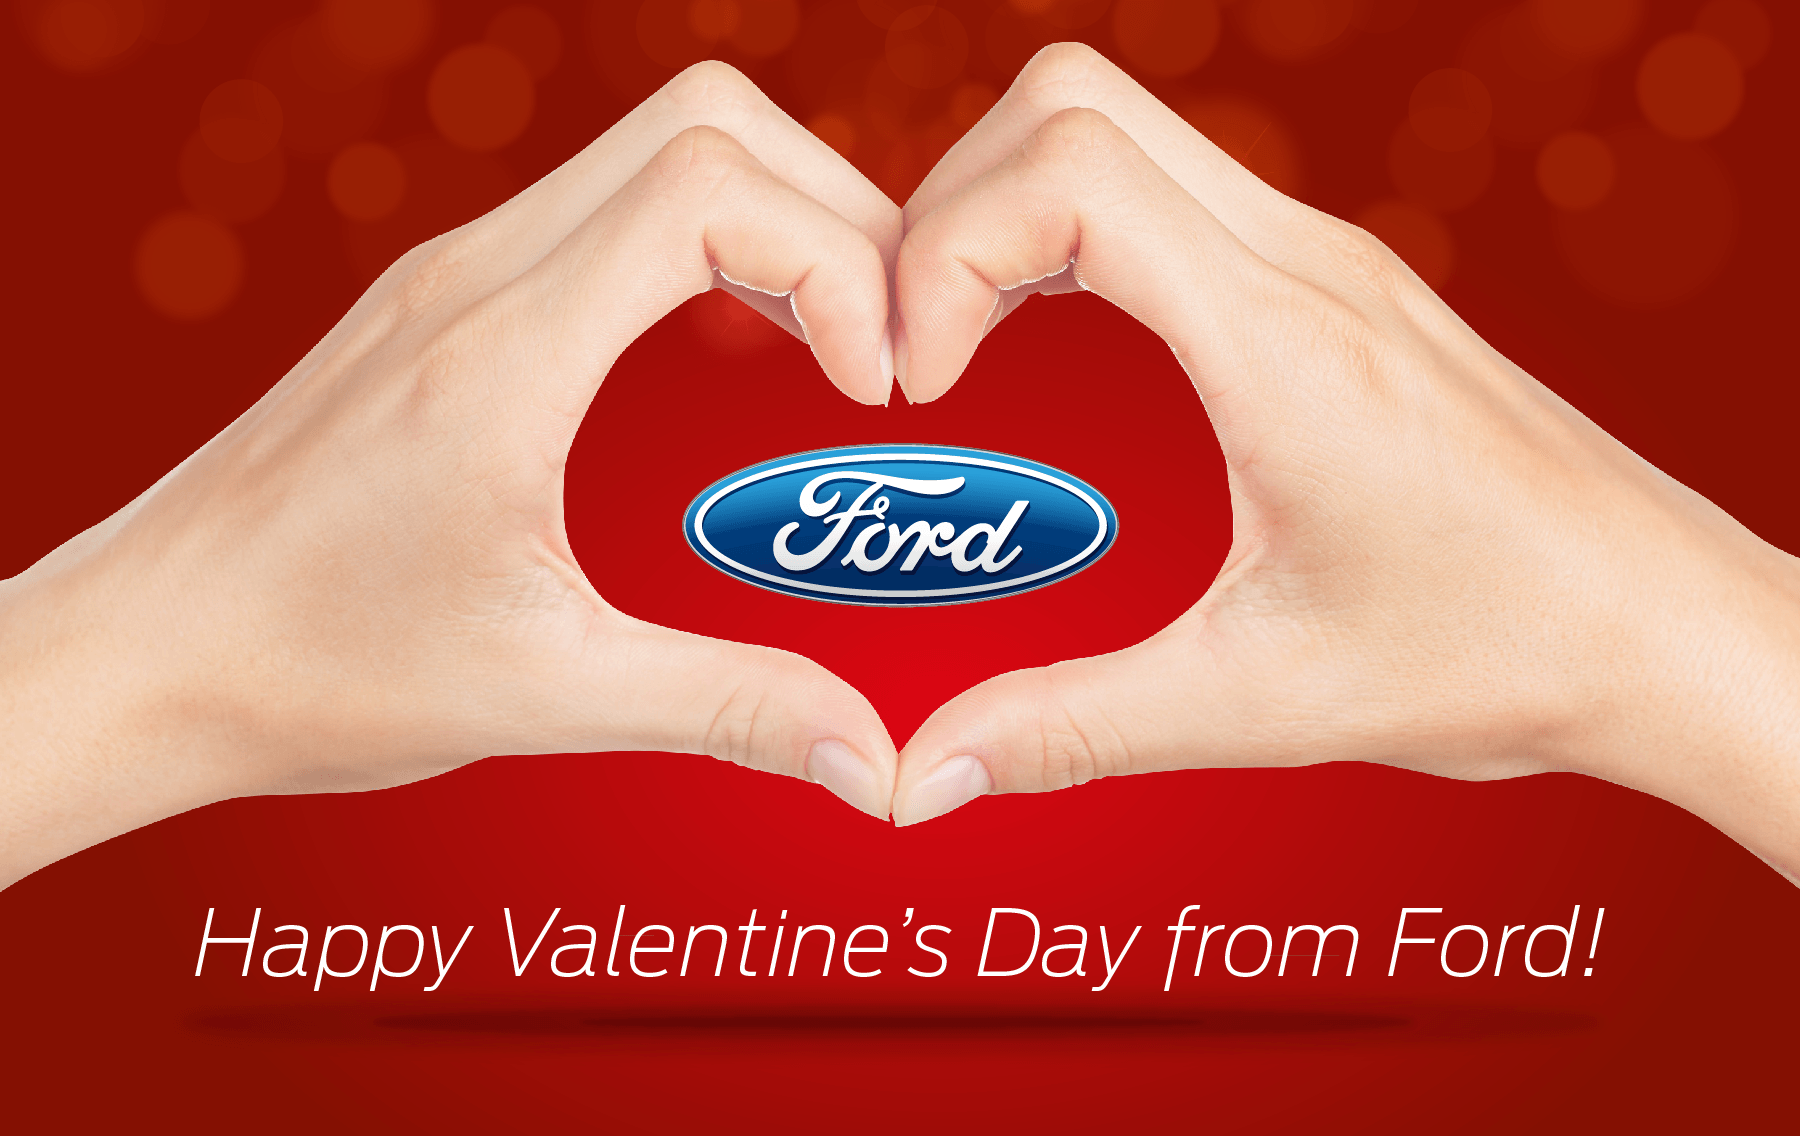 2 Red Hands Logo - 9 Romantic Tips From Ford This Valentine's Day - Tusket Ford